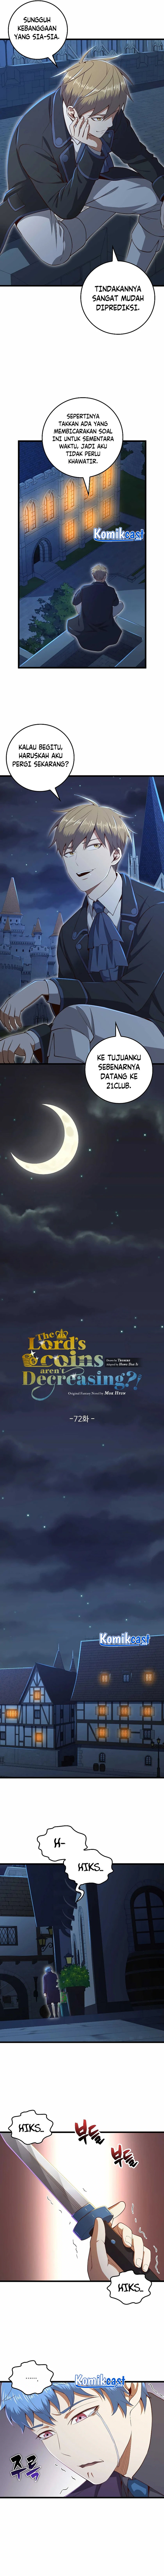 the-lords-coins-arent-decreasing Chapter 72